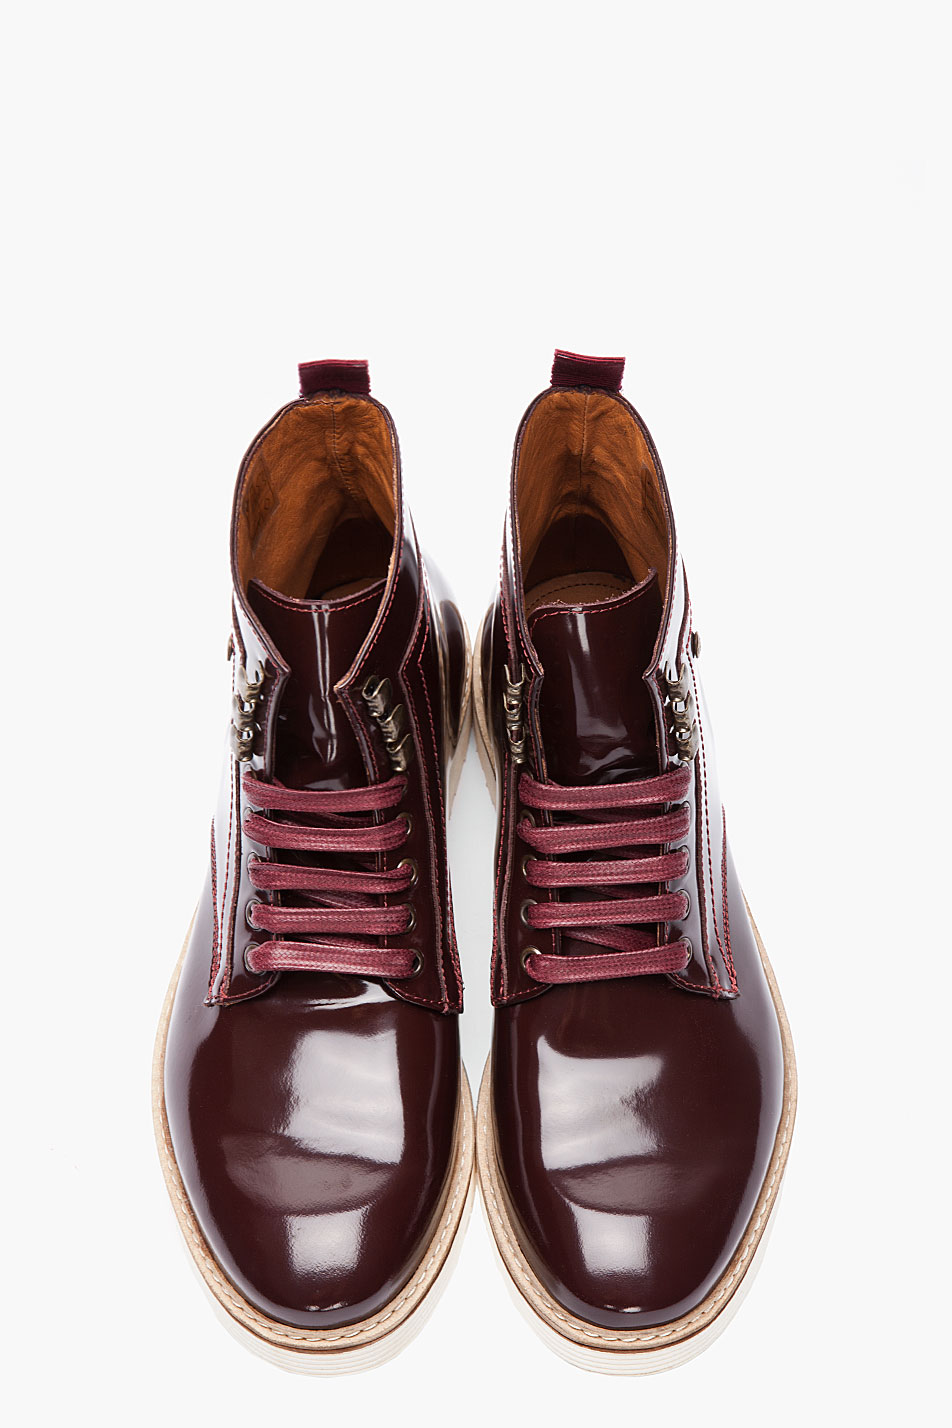 McQ Burgundy Patent Leather Military Boot in Brown for Men - Lyst